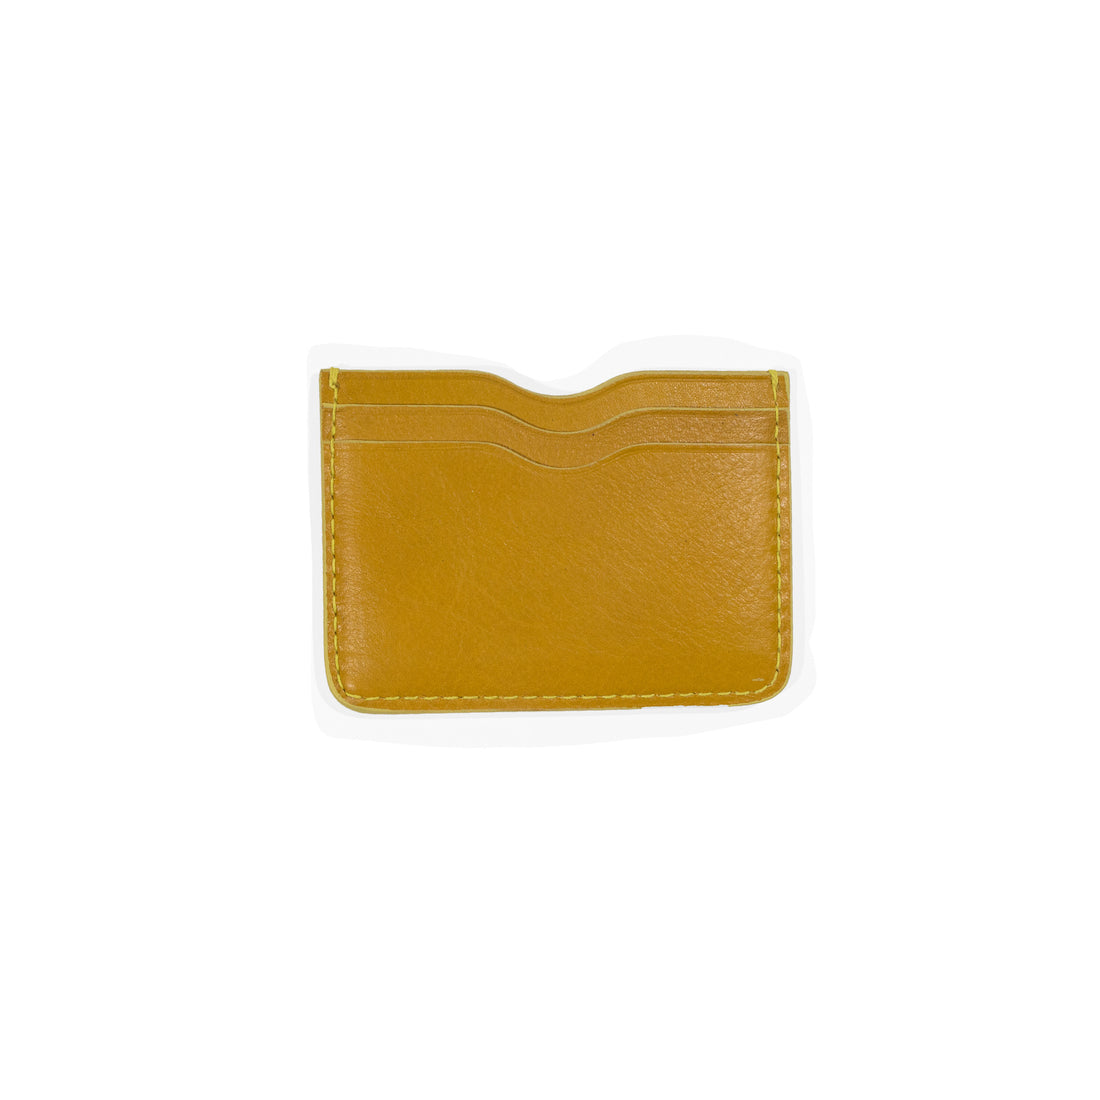 Lindquist Akira Wallet in Chartreuse